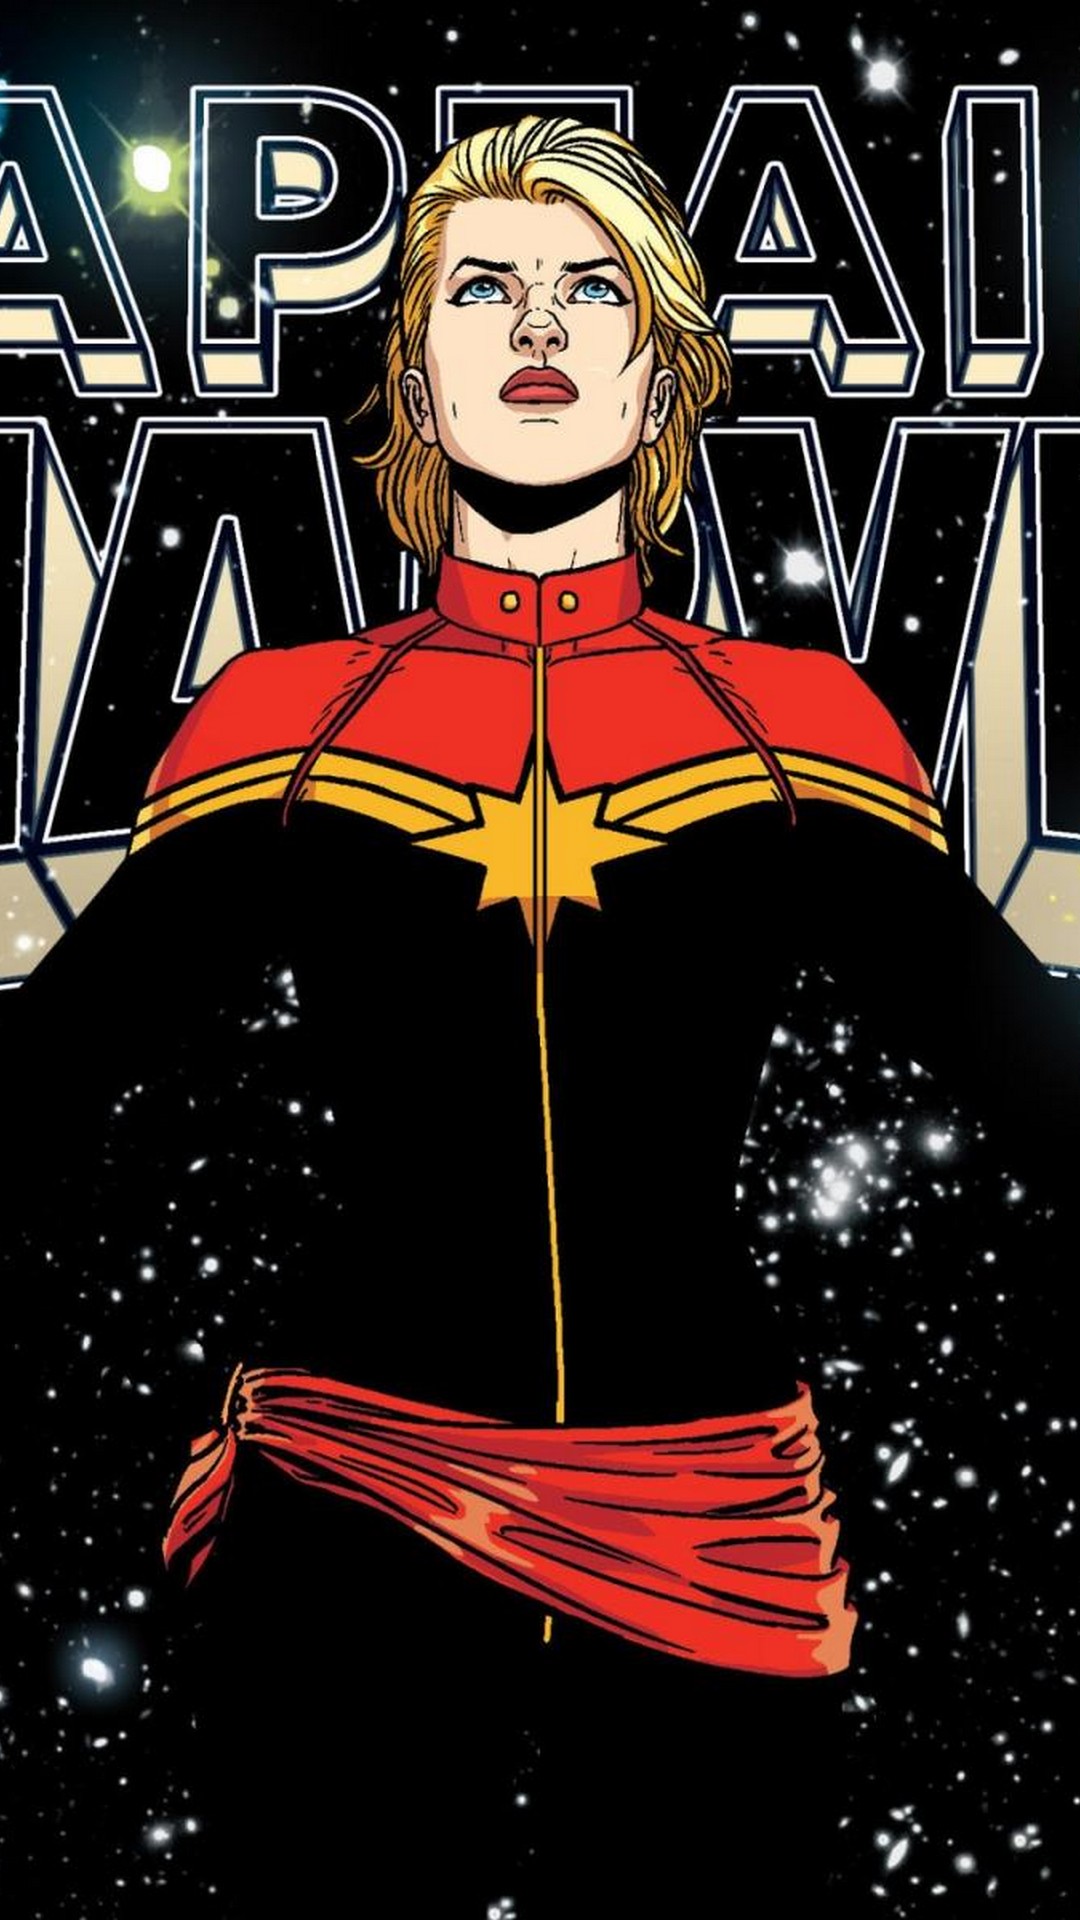 Captain Marvel Animated Wallpaper Android with high-resolution 1080x1920 pixel. You can use this wallpaper for your Android backgrounds, Tablet, Samsung Screensavers, Mobile Phone Lock Screen and another Smartphones device